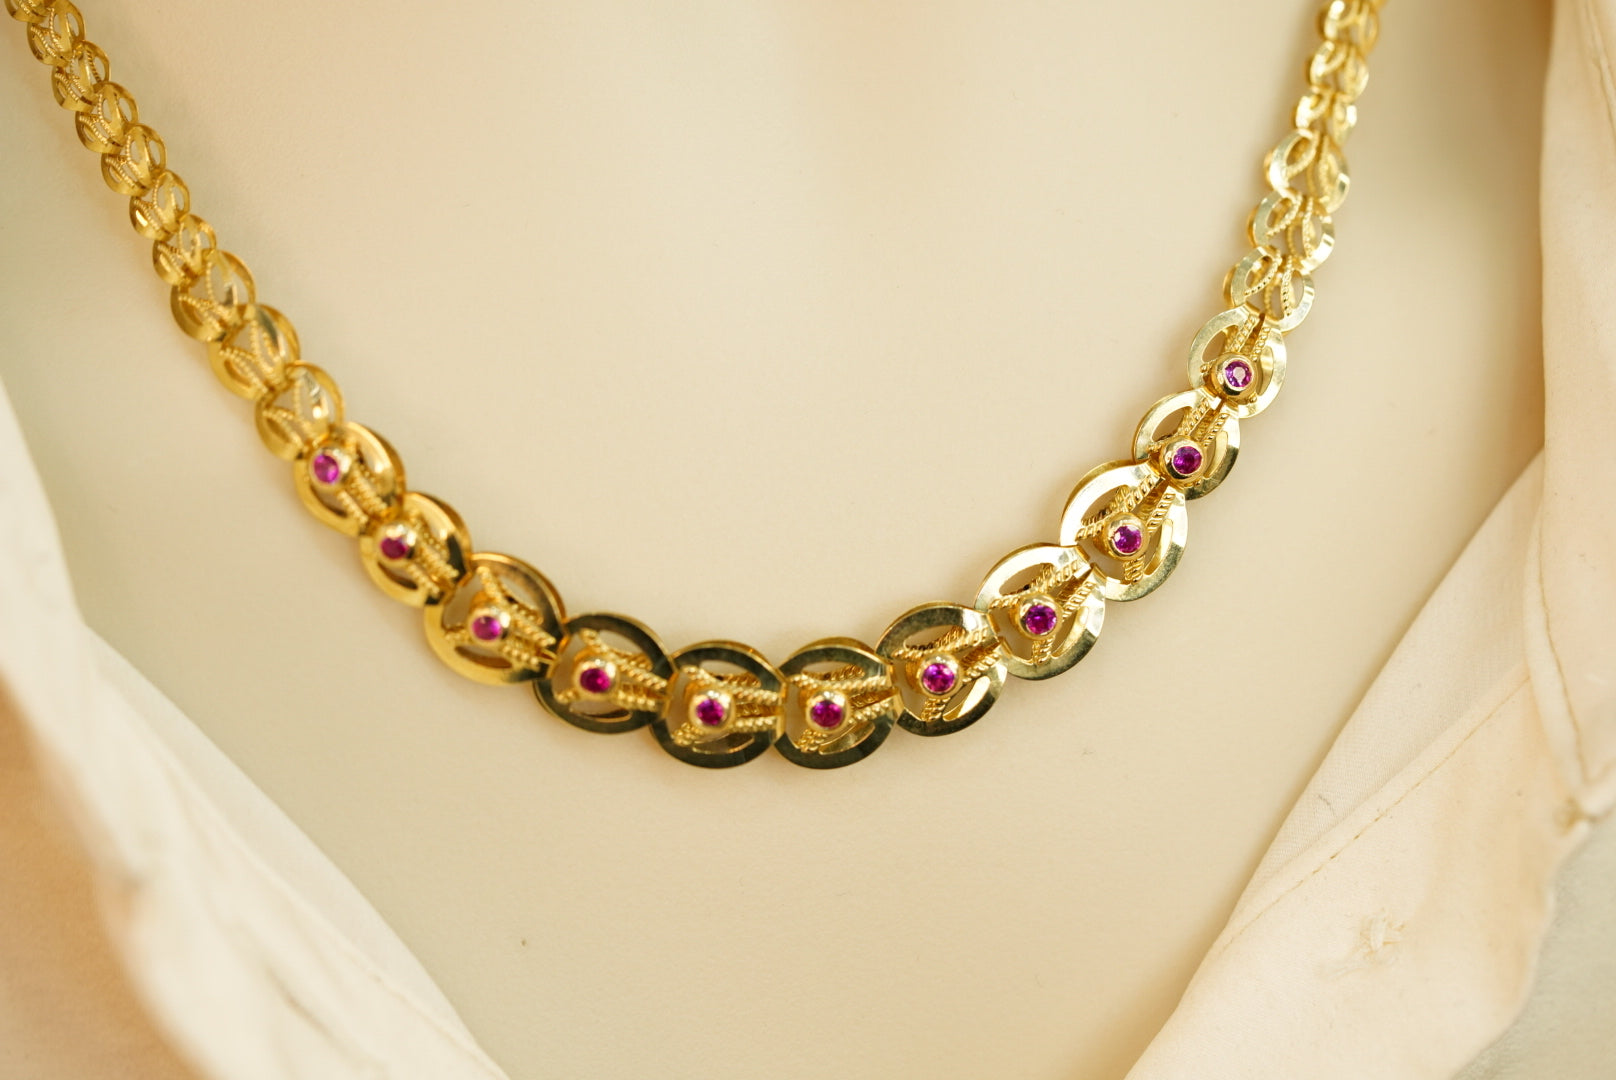 10k Reversible with White and Purple Crystal Necklace